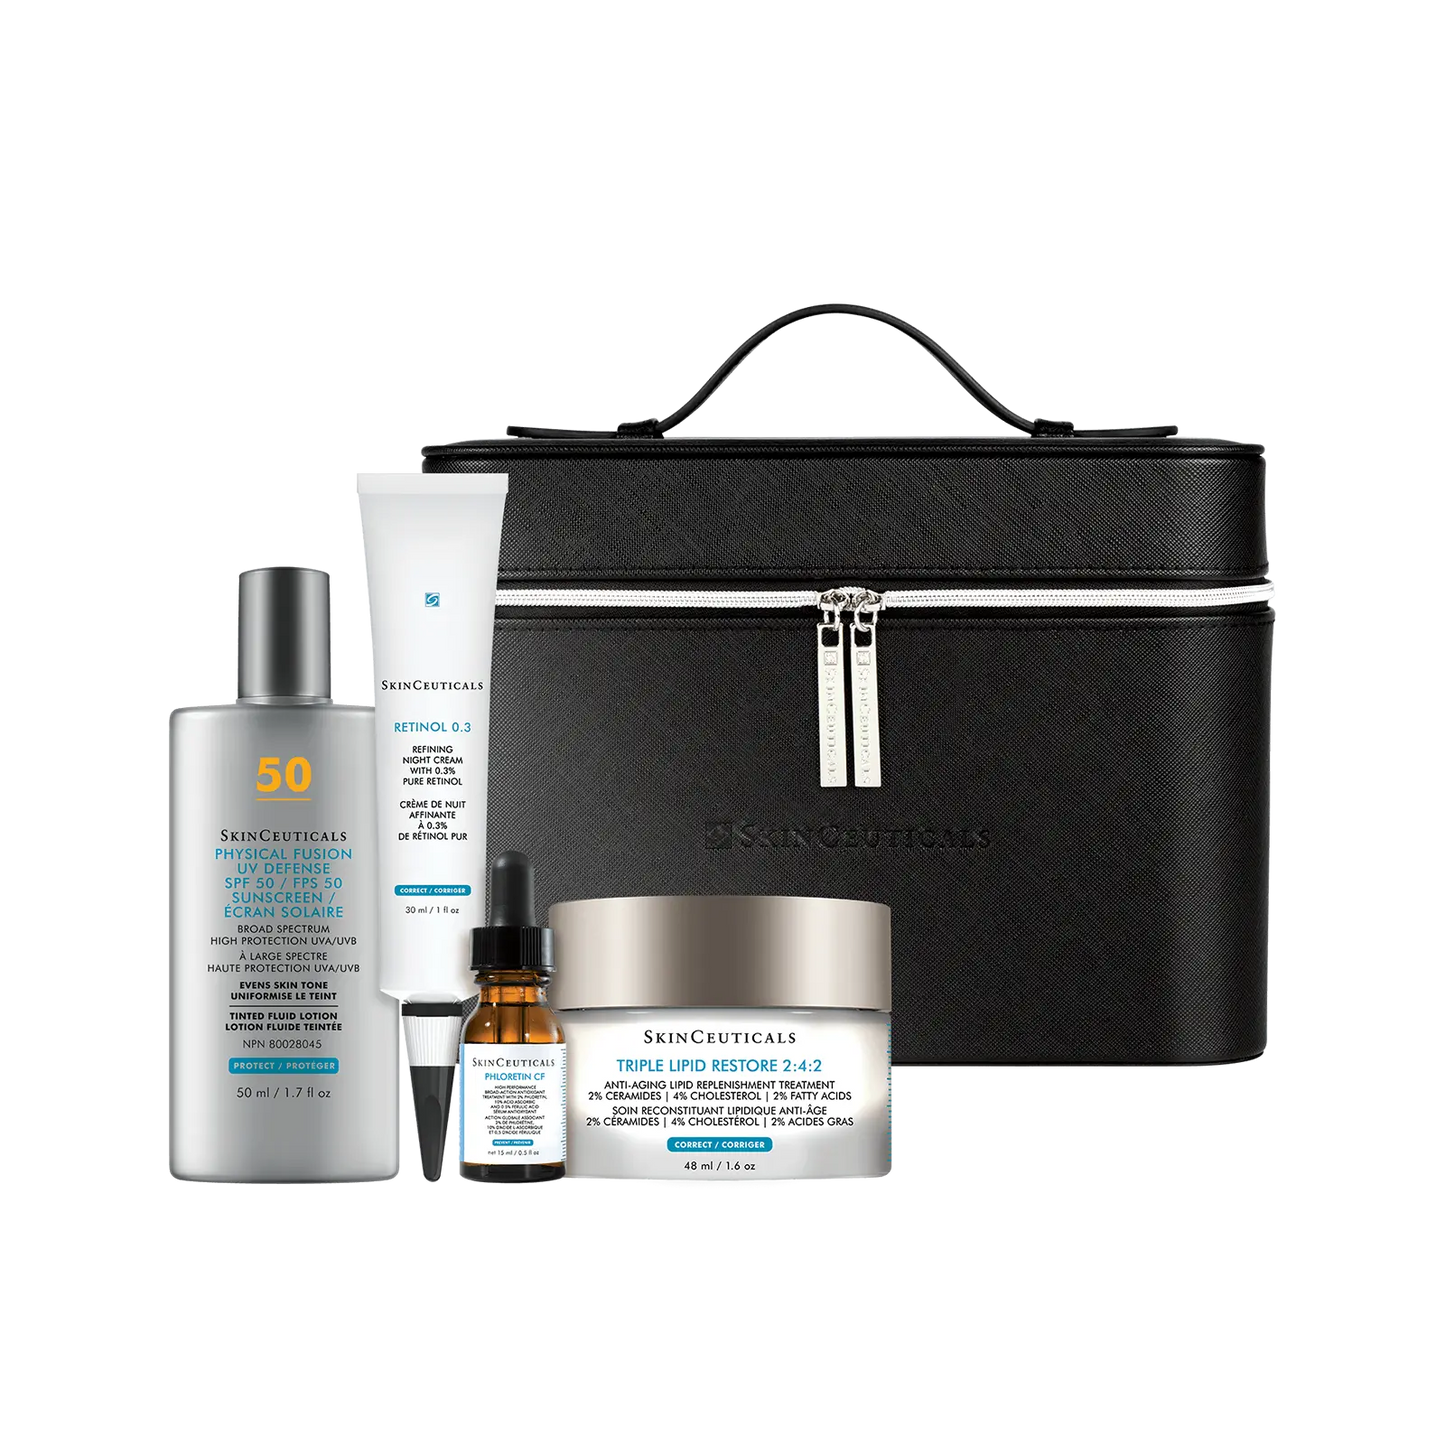 SkinCeuticals: First Signs of Aging Essentials